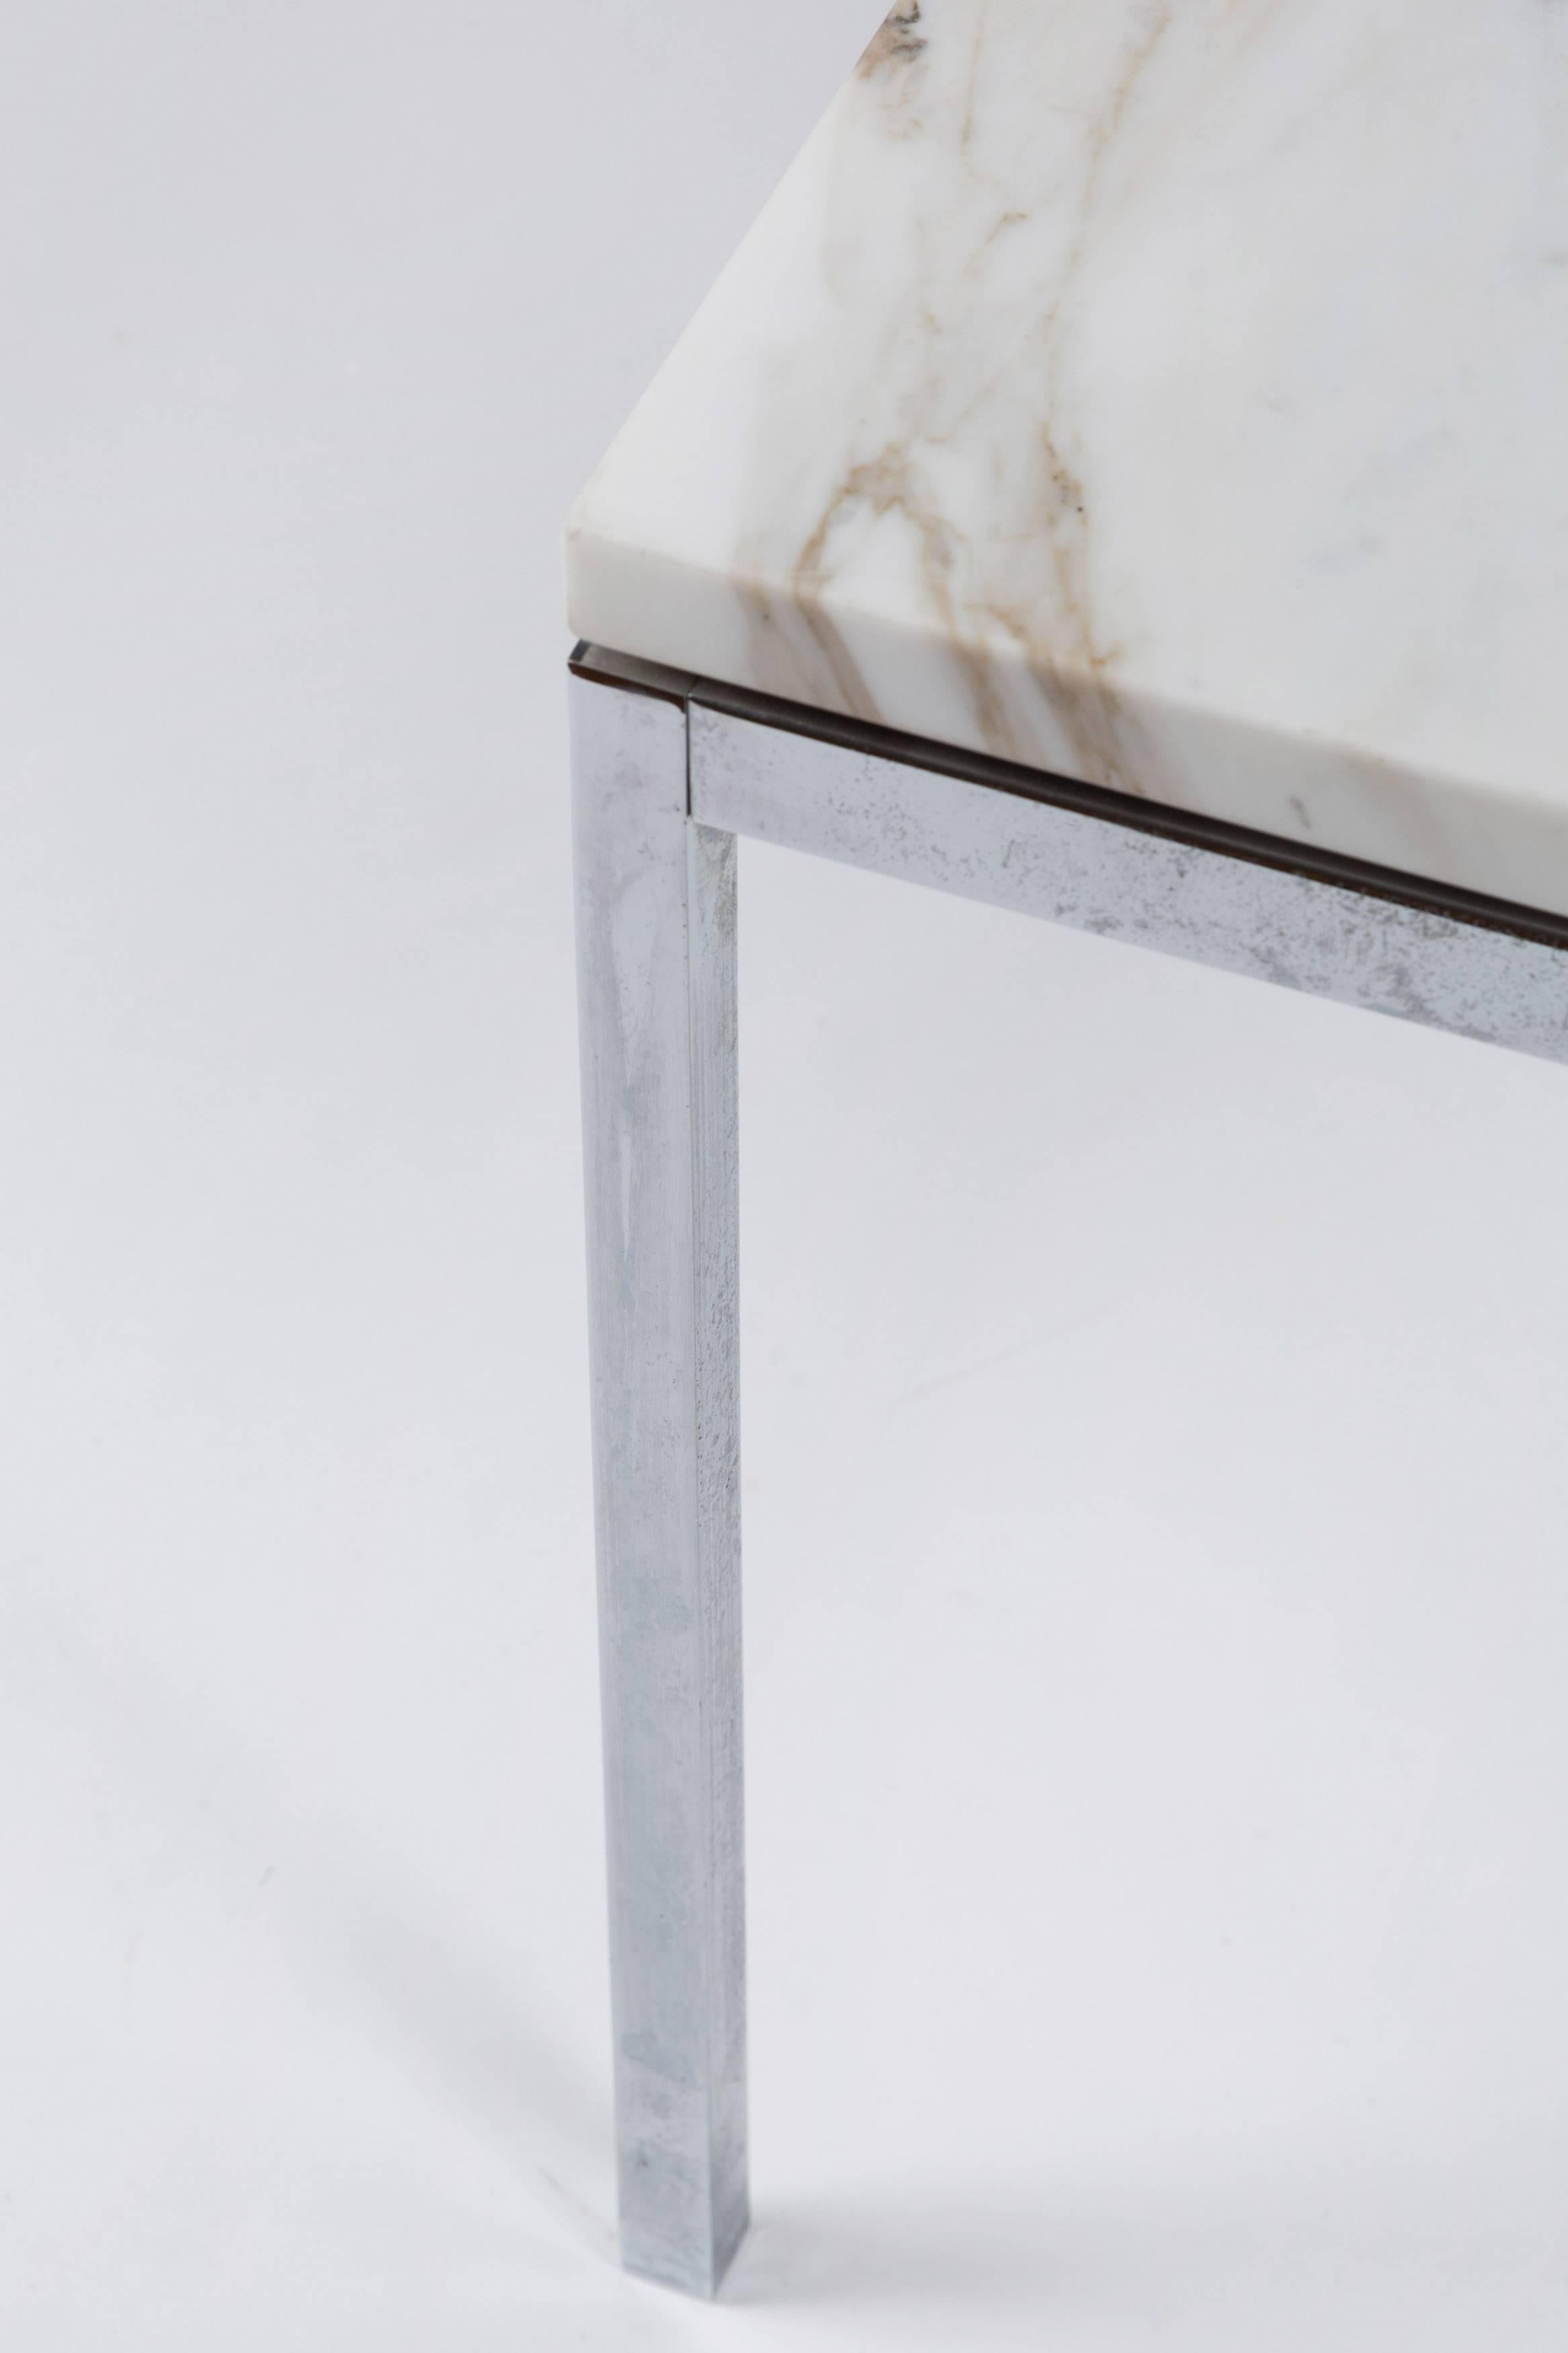 American Knoll-Style Chrome and Marble End Table, circa 1950 For Sale 1